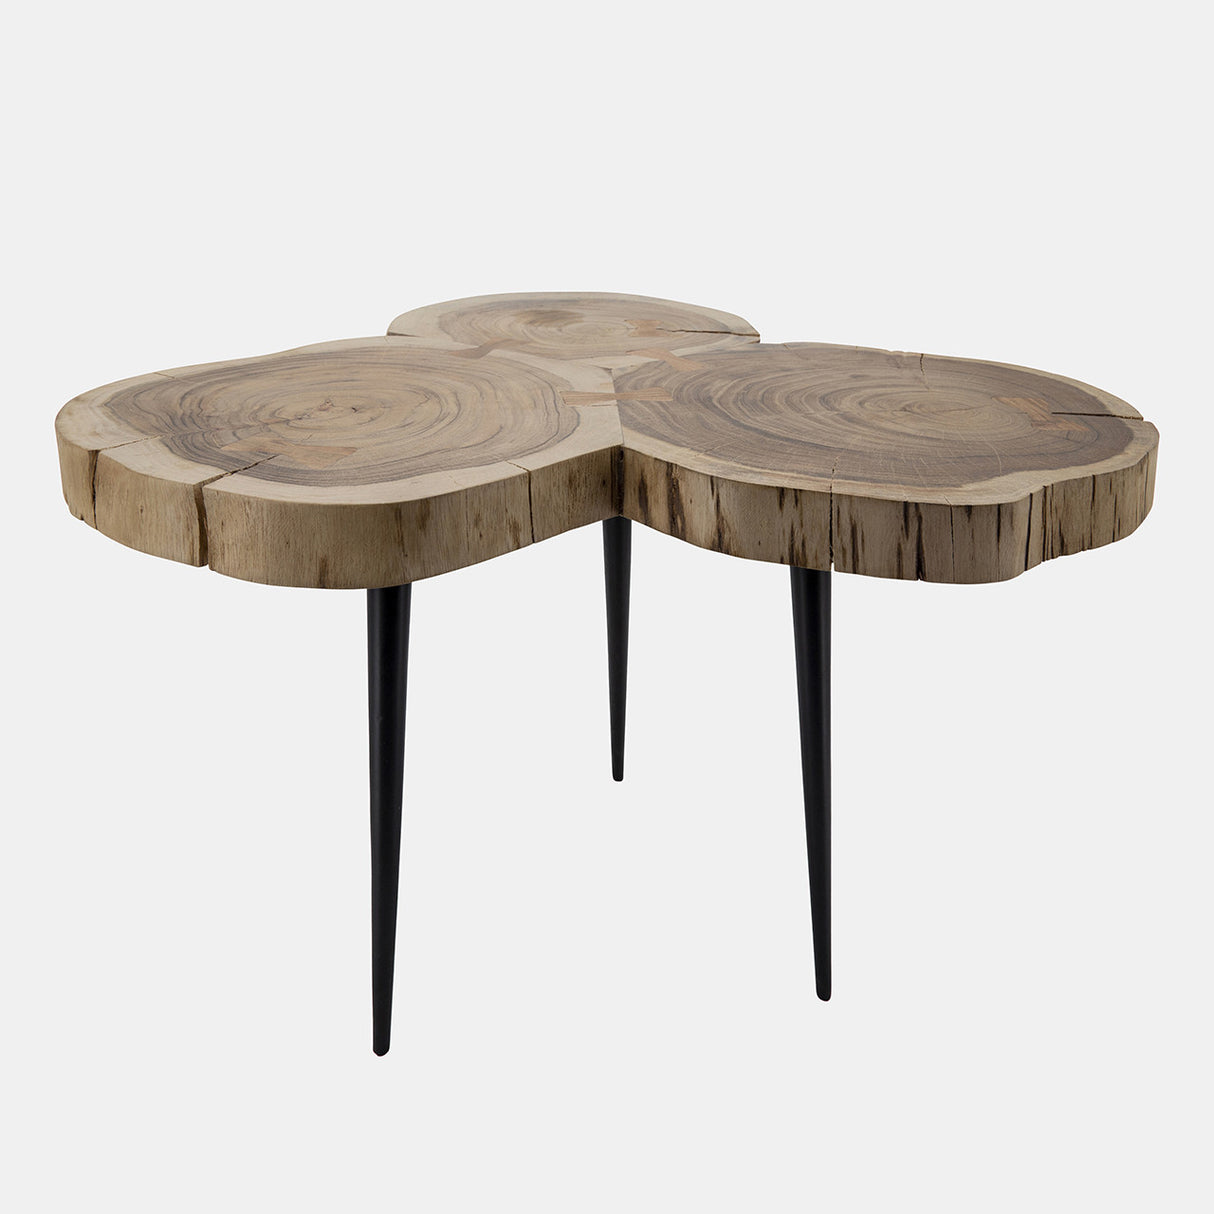 3-legged Wooden Side Table - Pickup Only